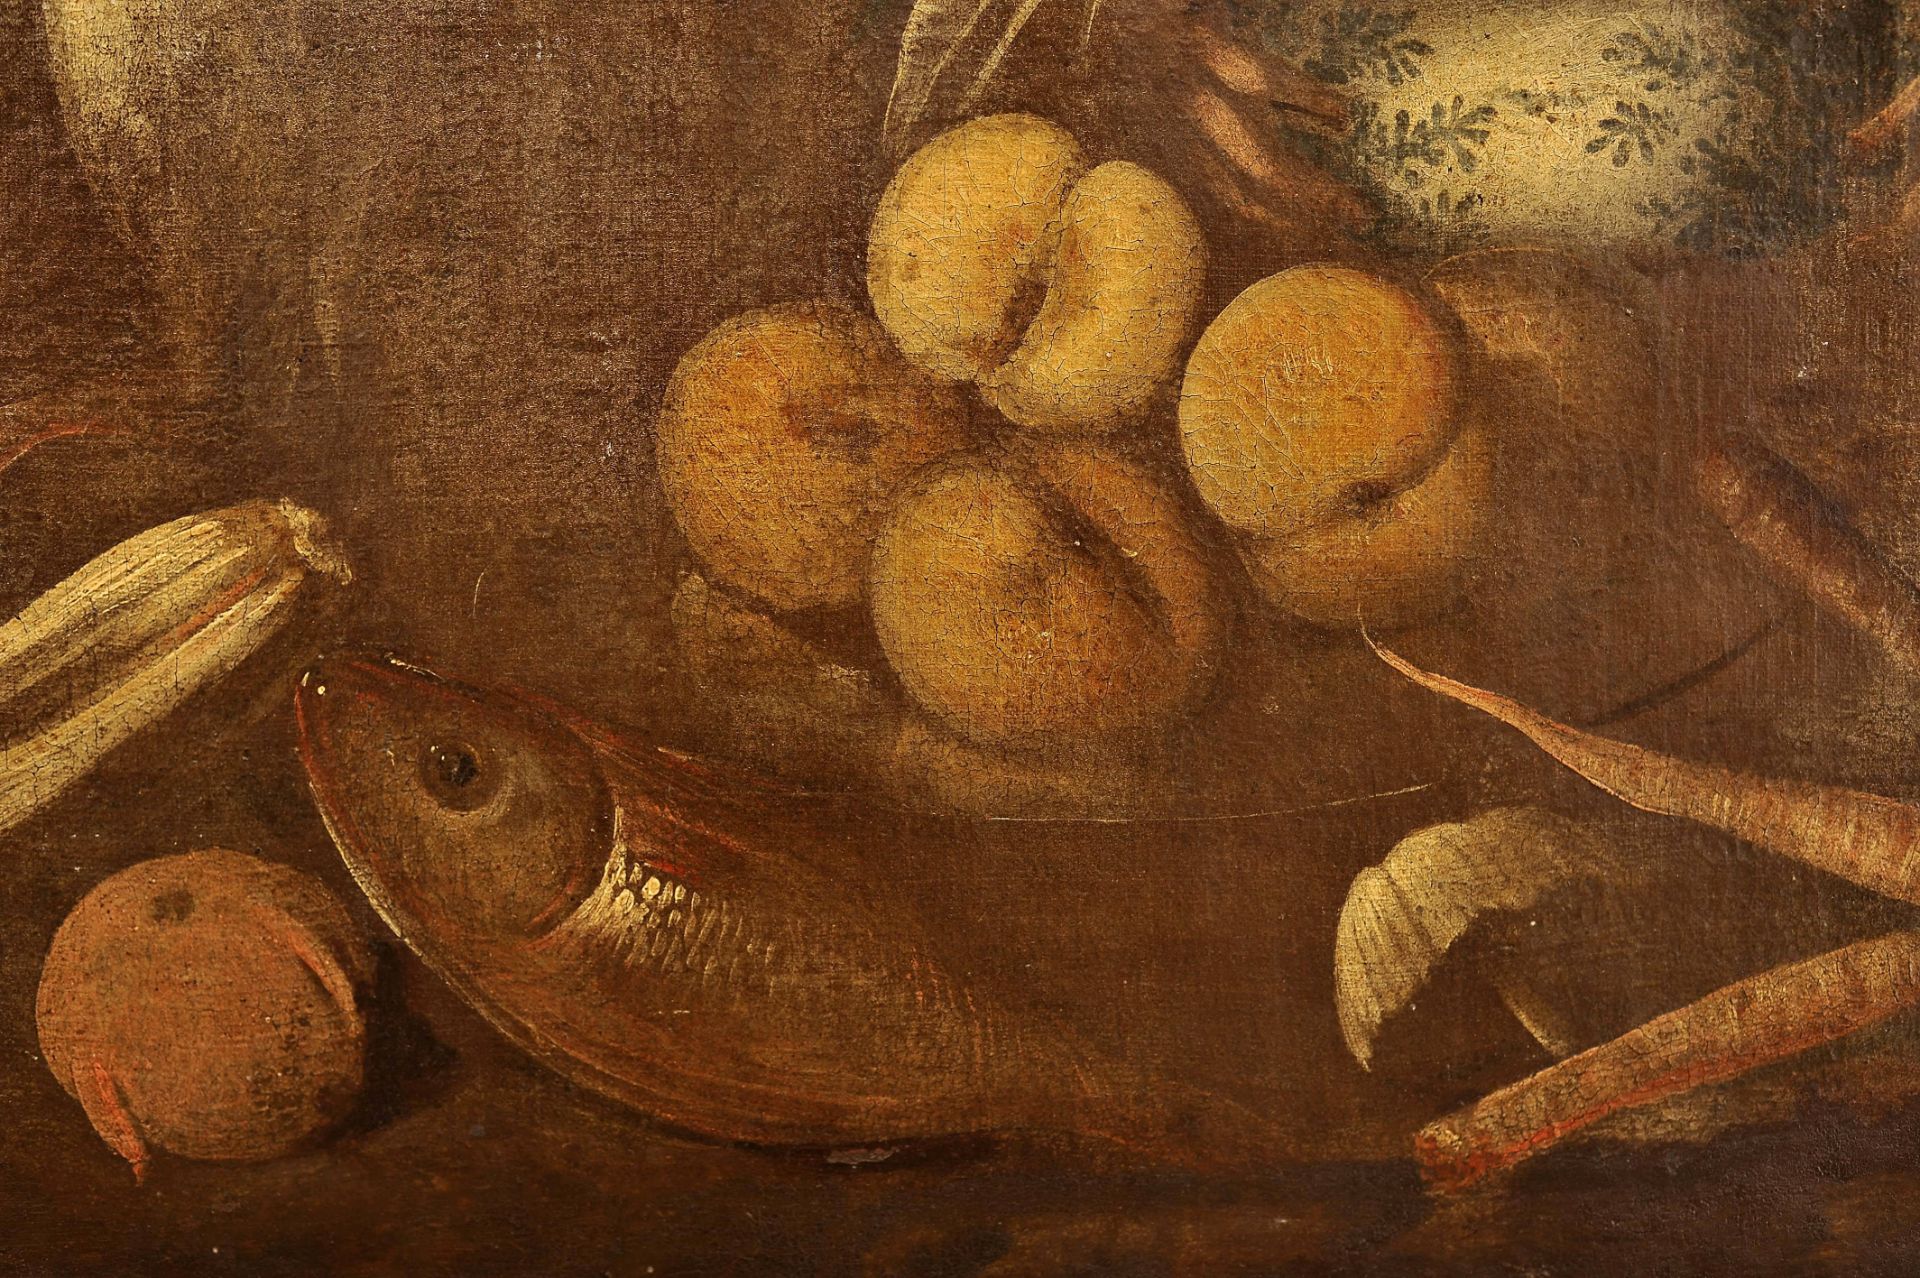 Female Figure, Cat, Fish, Oysters and Fruits - Bild 5 aus 6